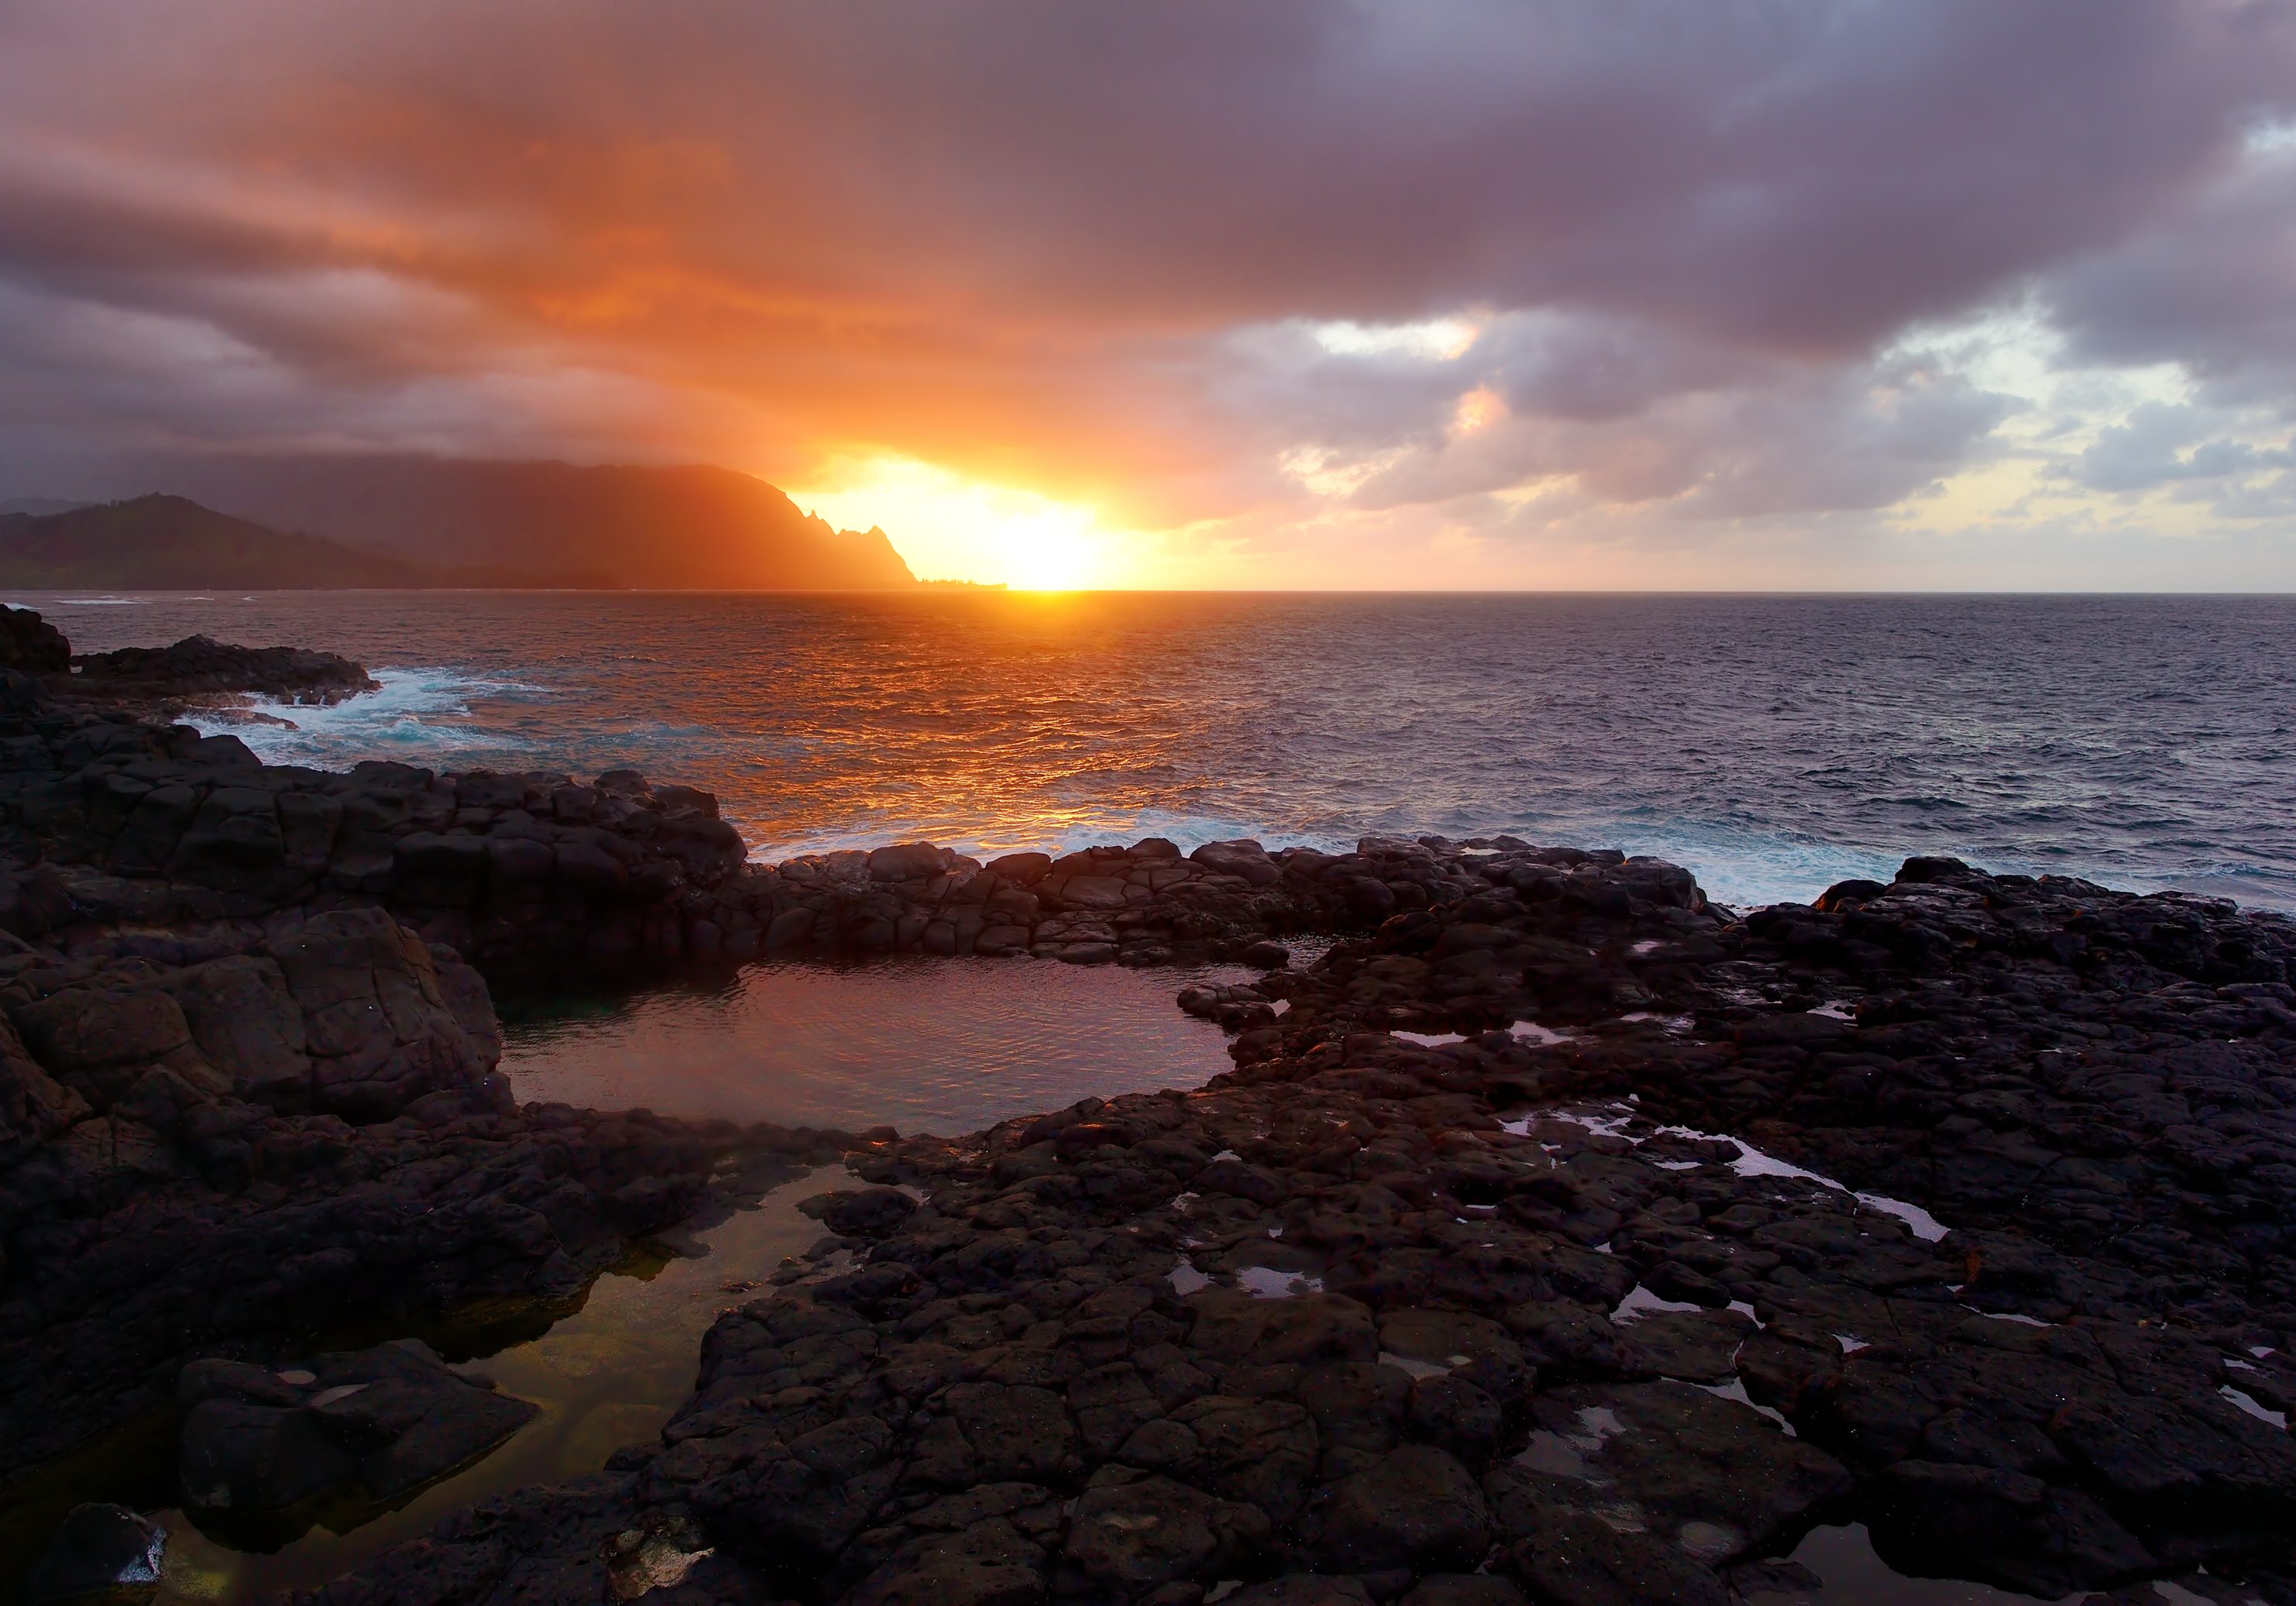 Queen's Bath on sunset on the island of Kauai, Hawaii. The pools are sinkholes surrounded by lava rock.